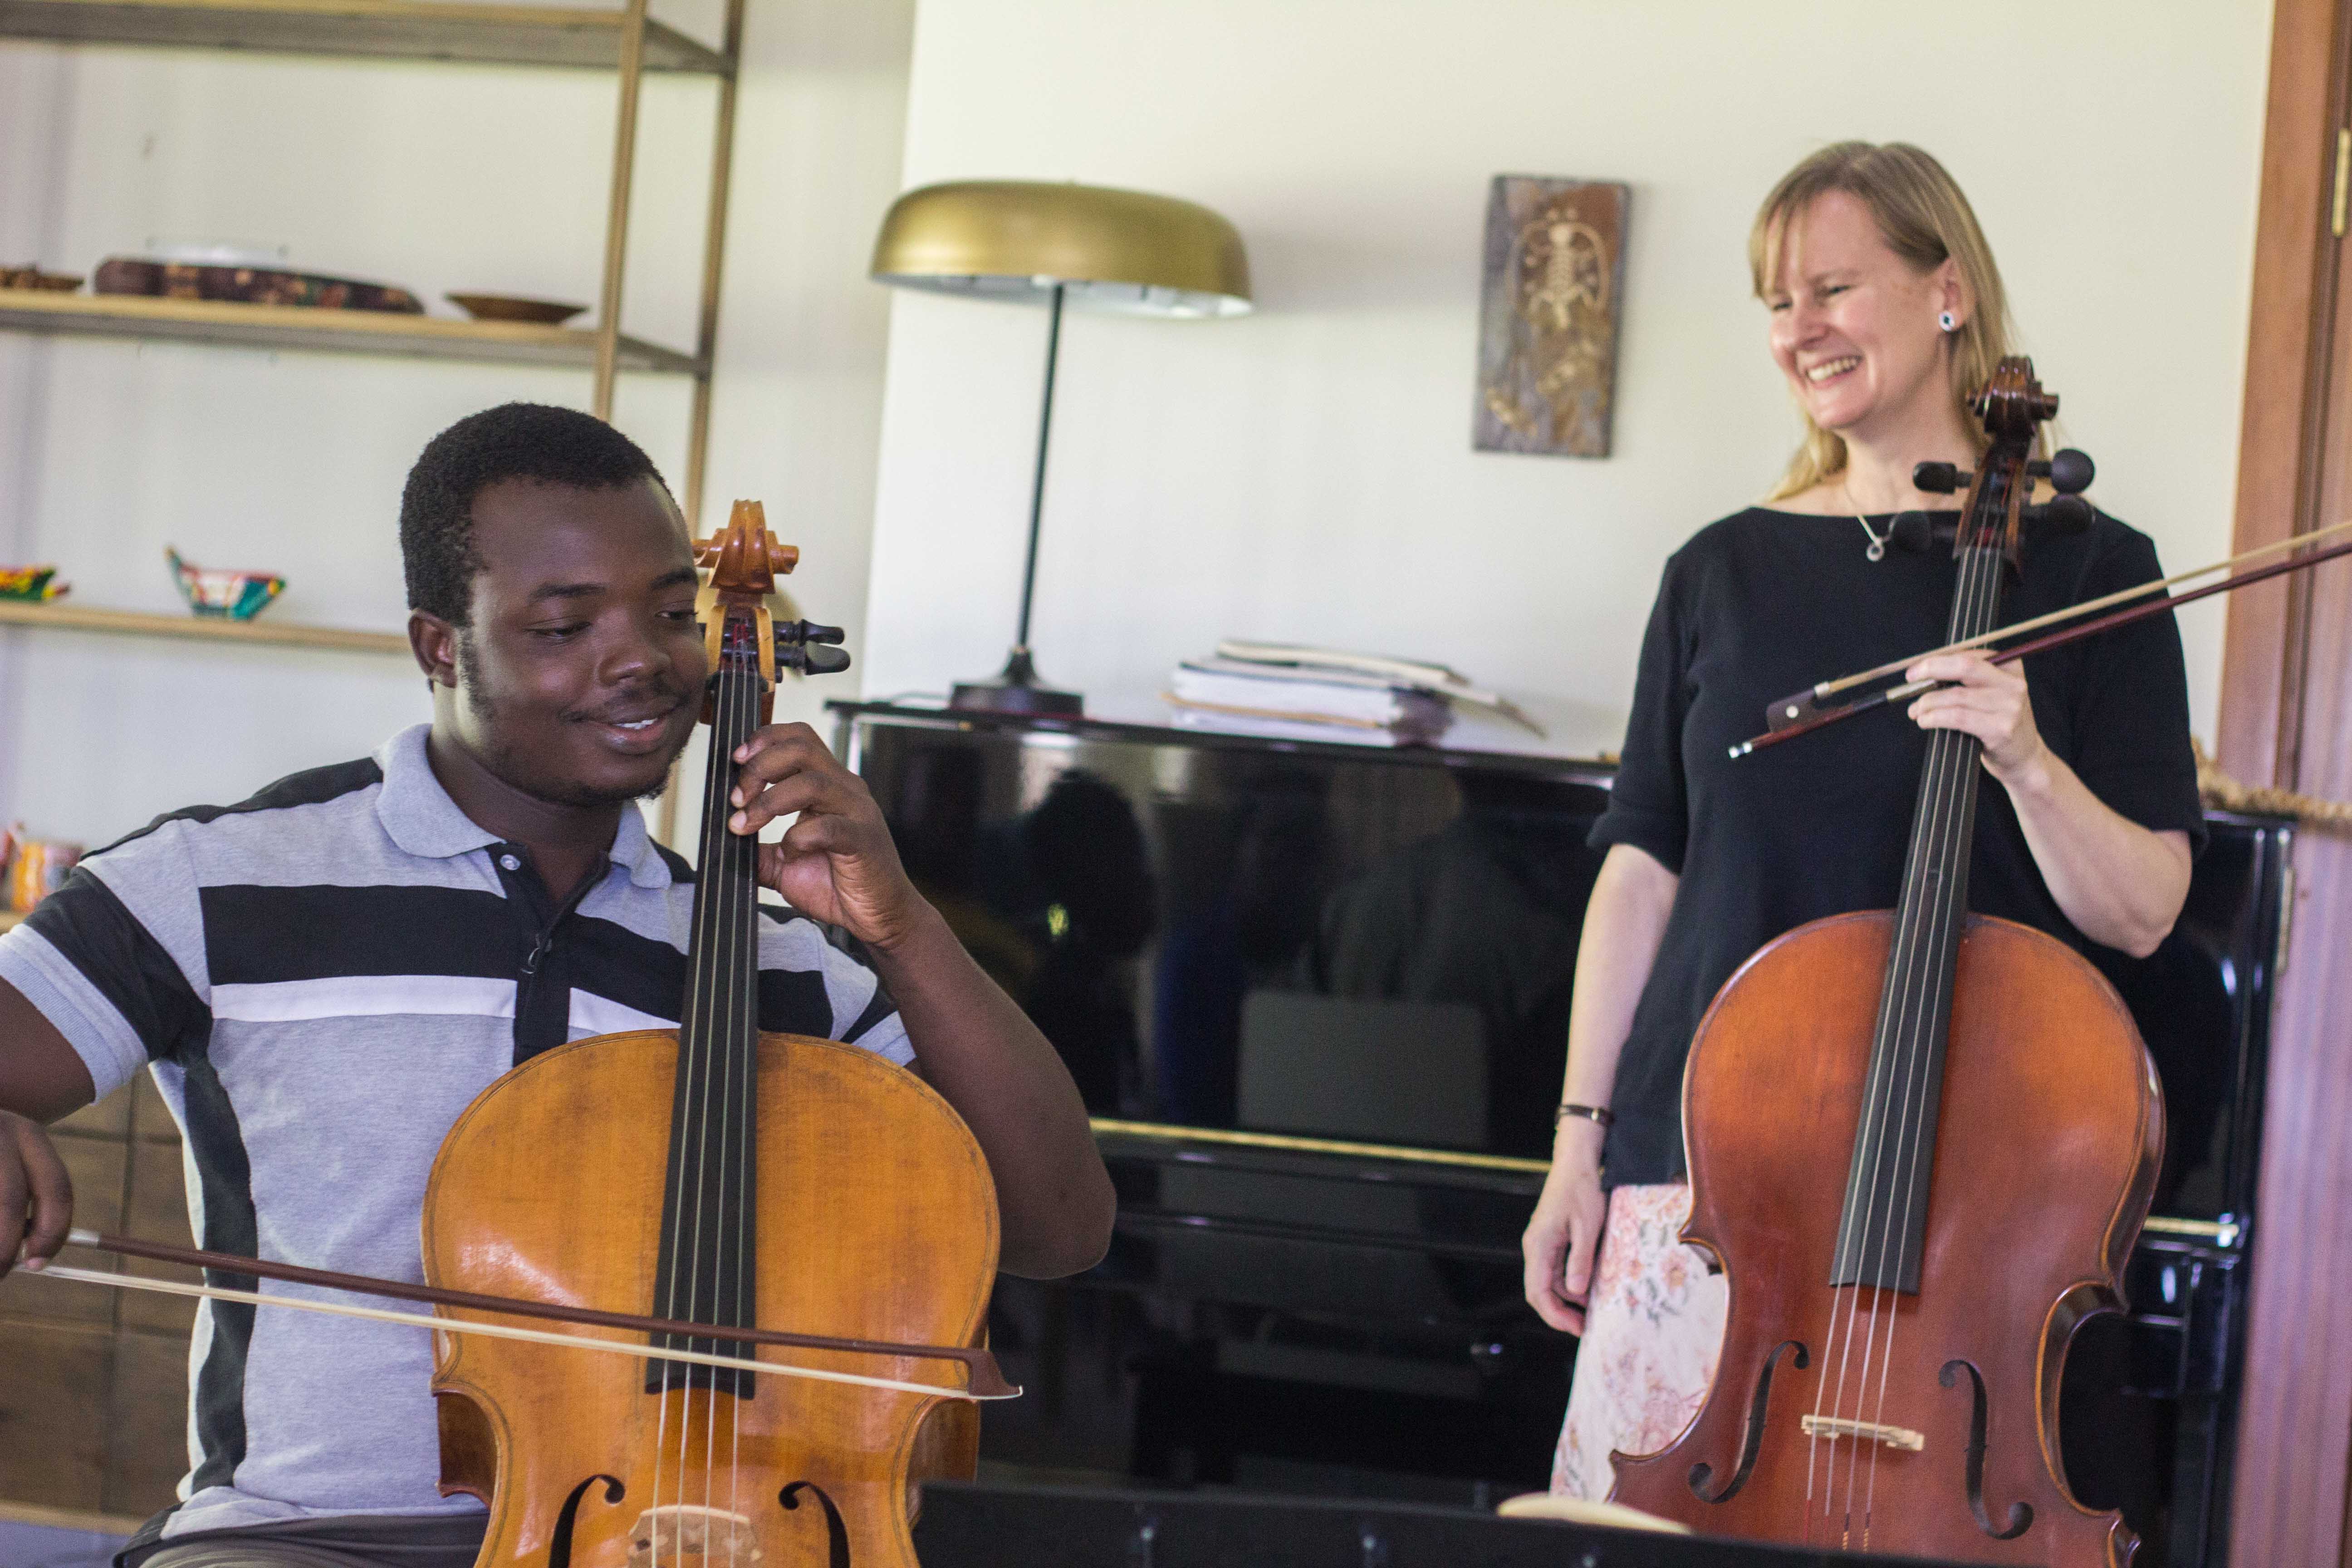 Sally Singer Tuttle: A Fascination with Ghanaian Art Music Jesse Johnson interviews Sally Singer Tuttle, an American cellist whose love affair with Ghanaian music brought her to Accra in September 2019 to help grow Ghanaian musicians